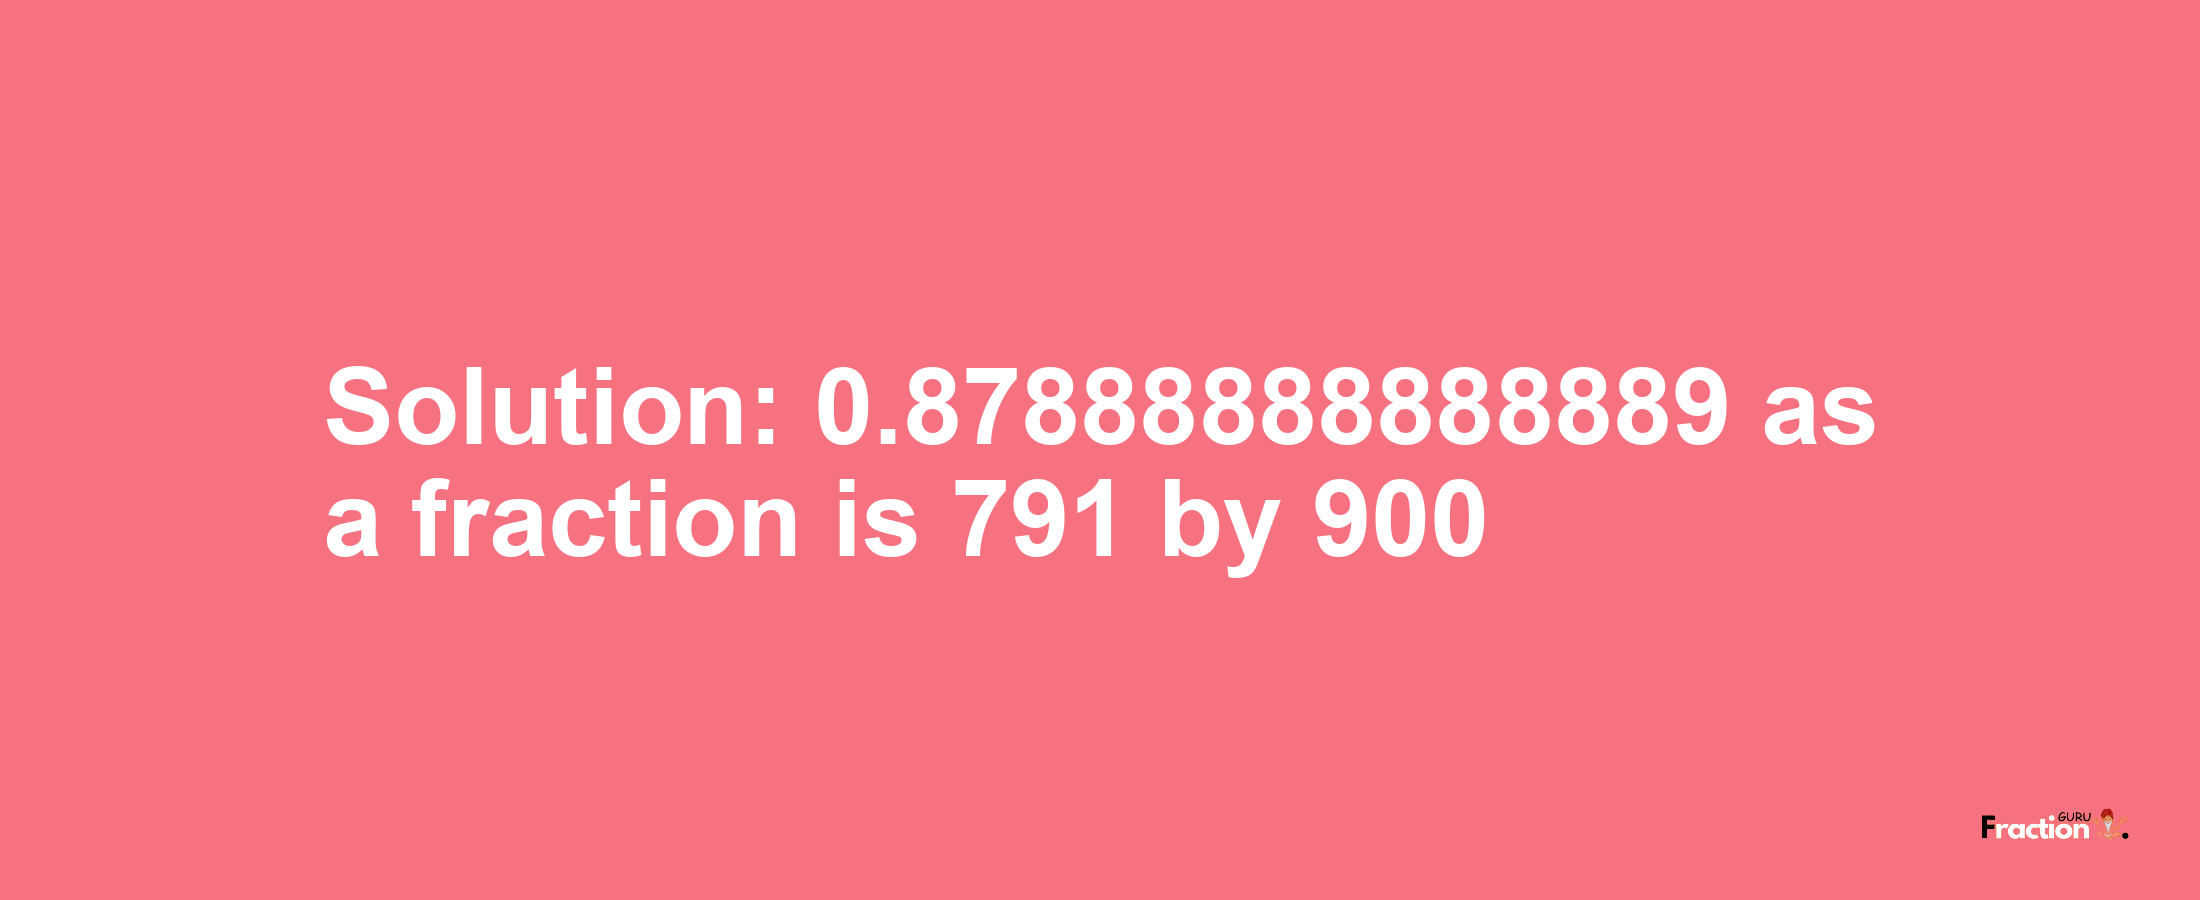 Solution:0.87888888888889 as a fraction is 791/900